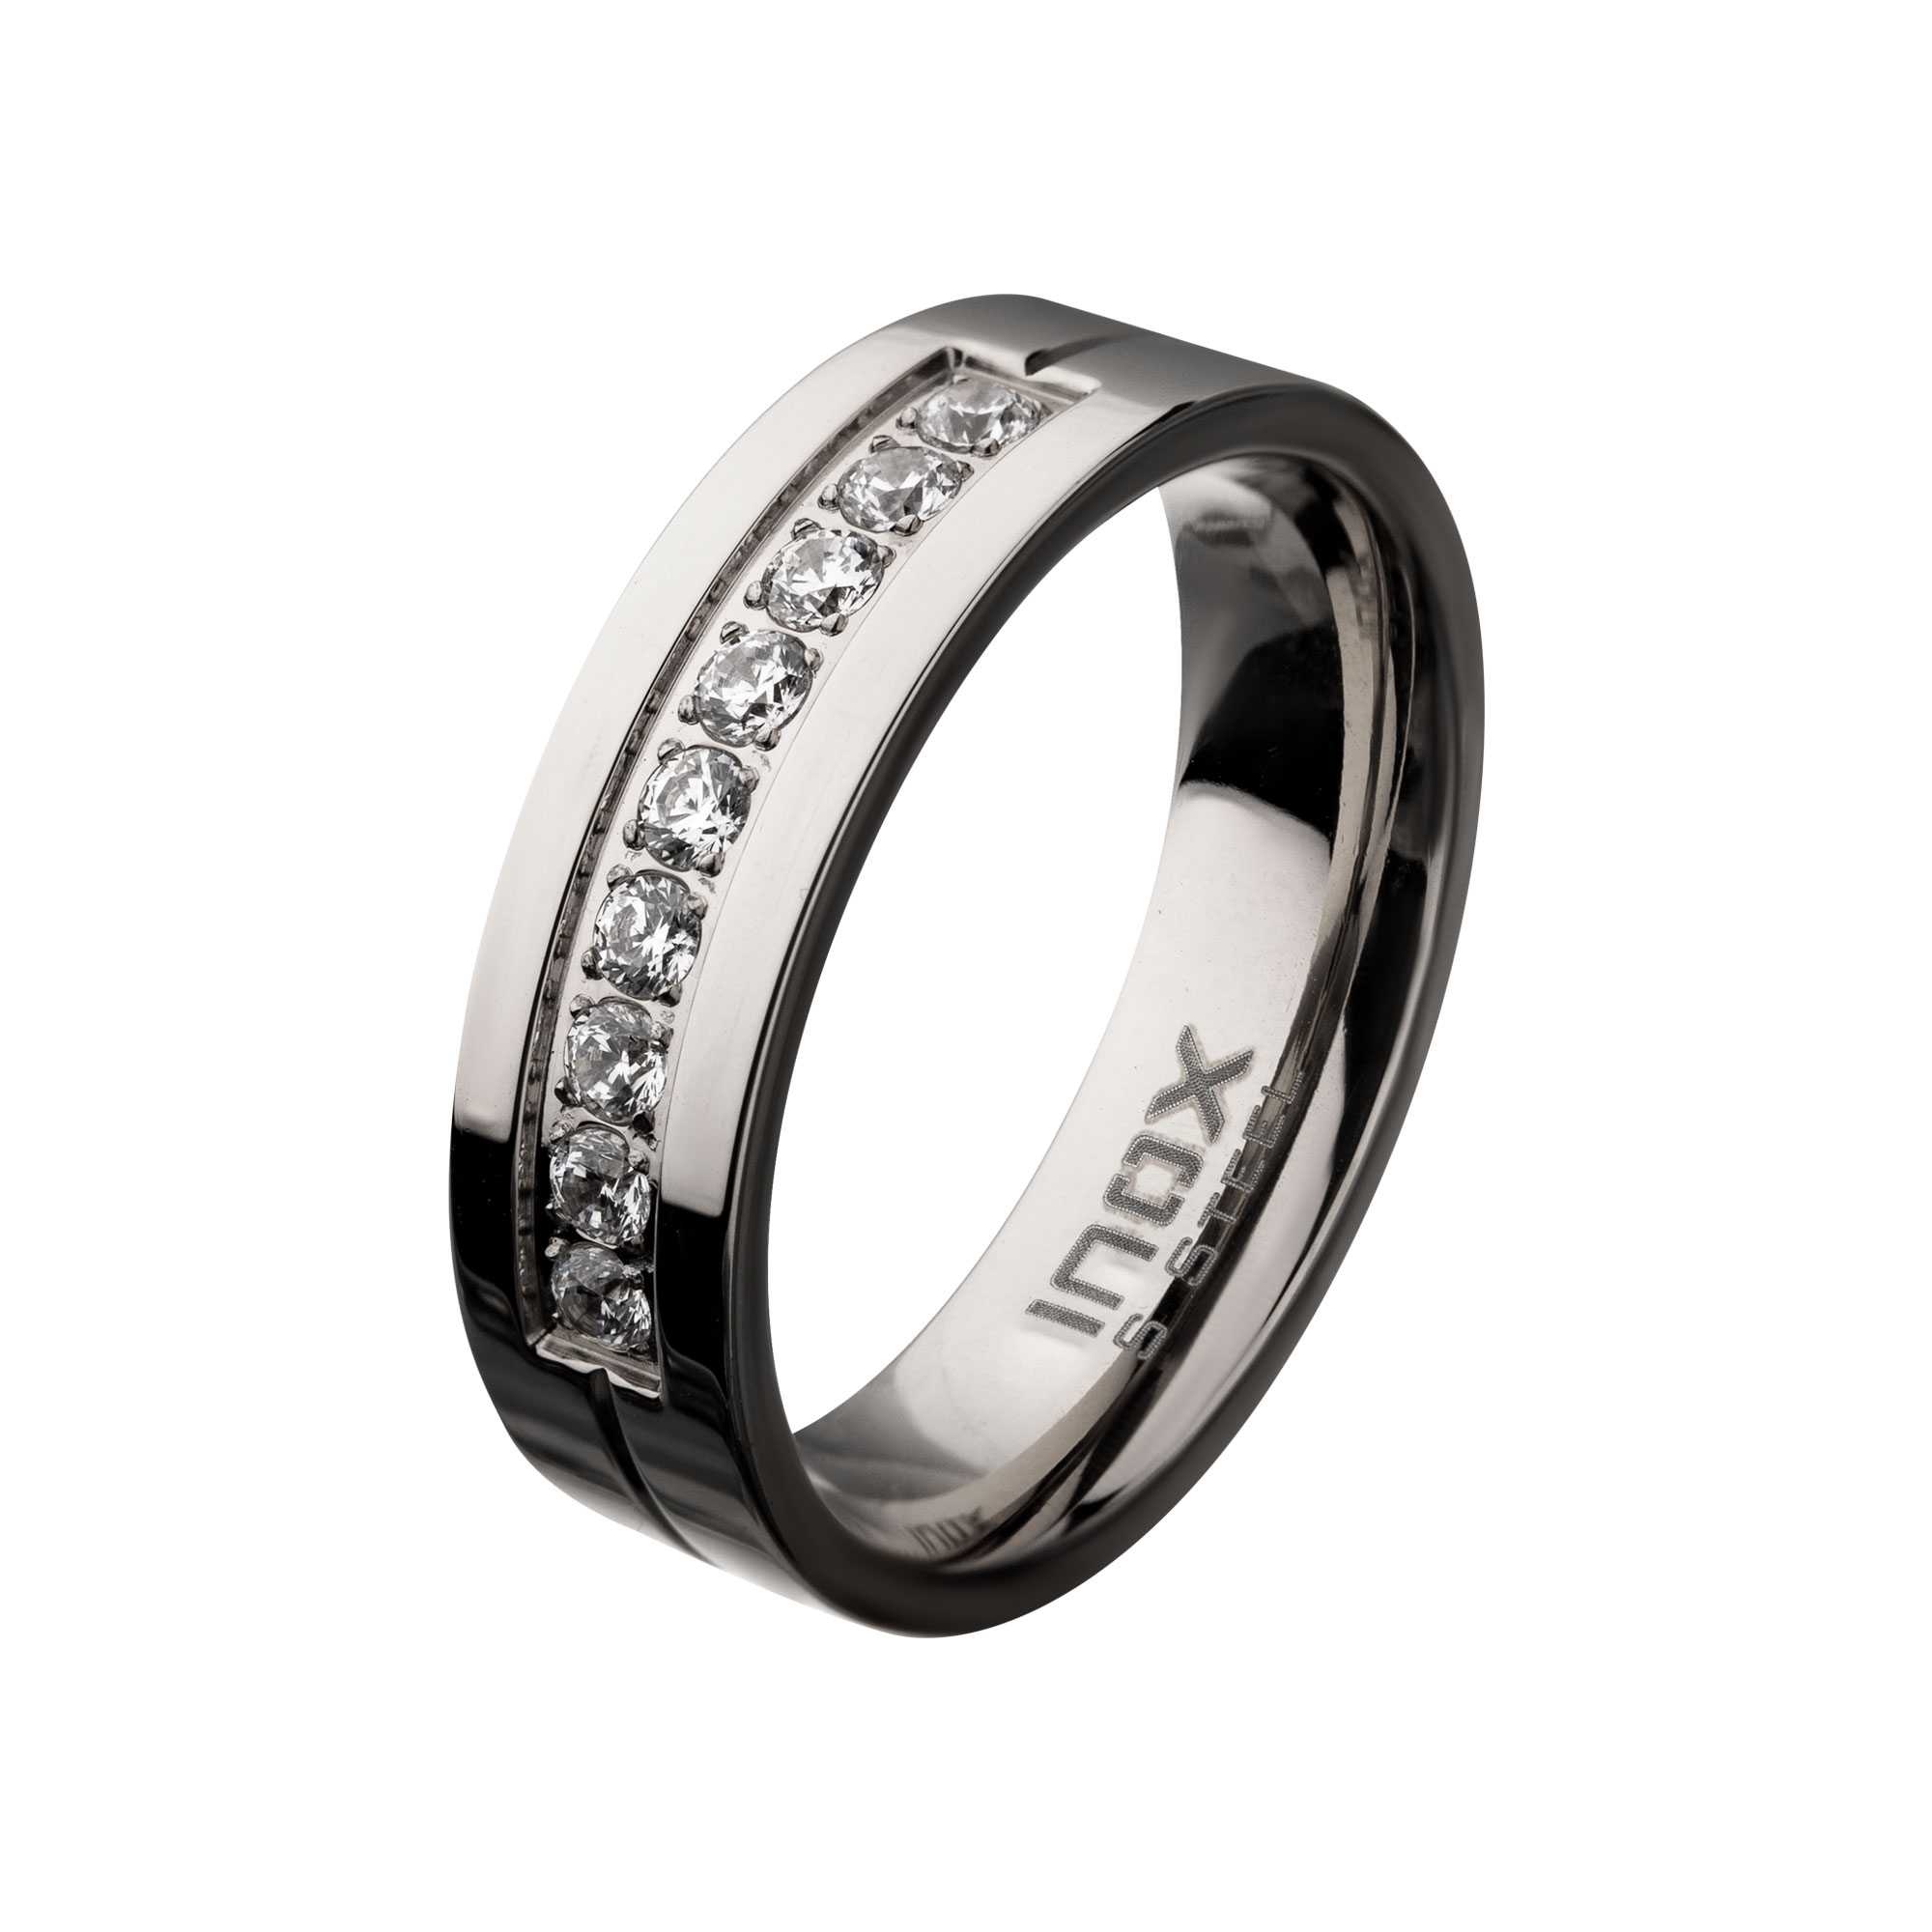 Stainless Steel Polished Steel ComfortFit Band with CZ's in Bead Channel Setting Ring Carroll / Ochs Jewelers Monroe, MI